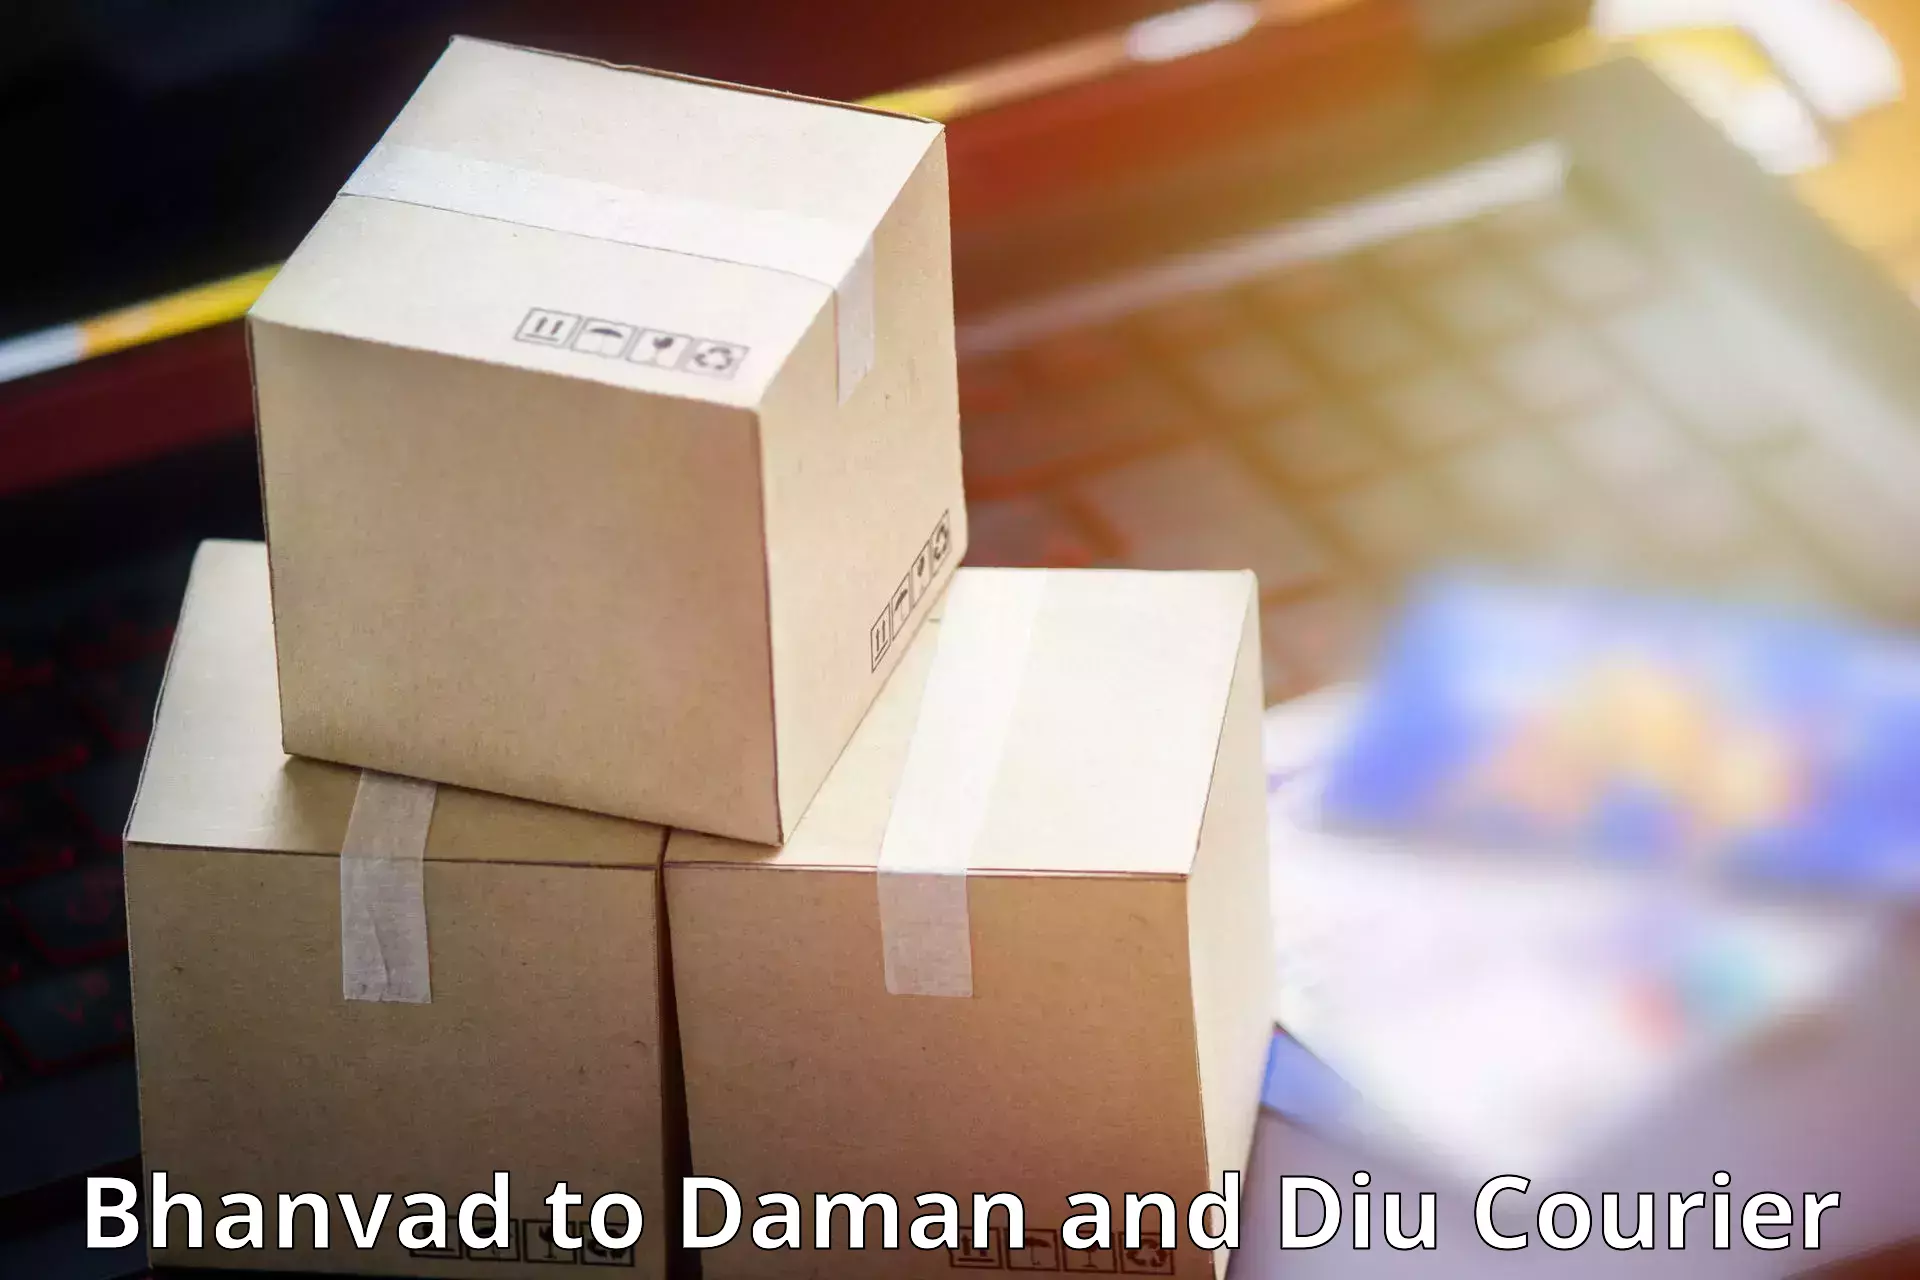 Express package delivery in Bhanvad to Daman